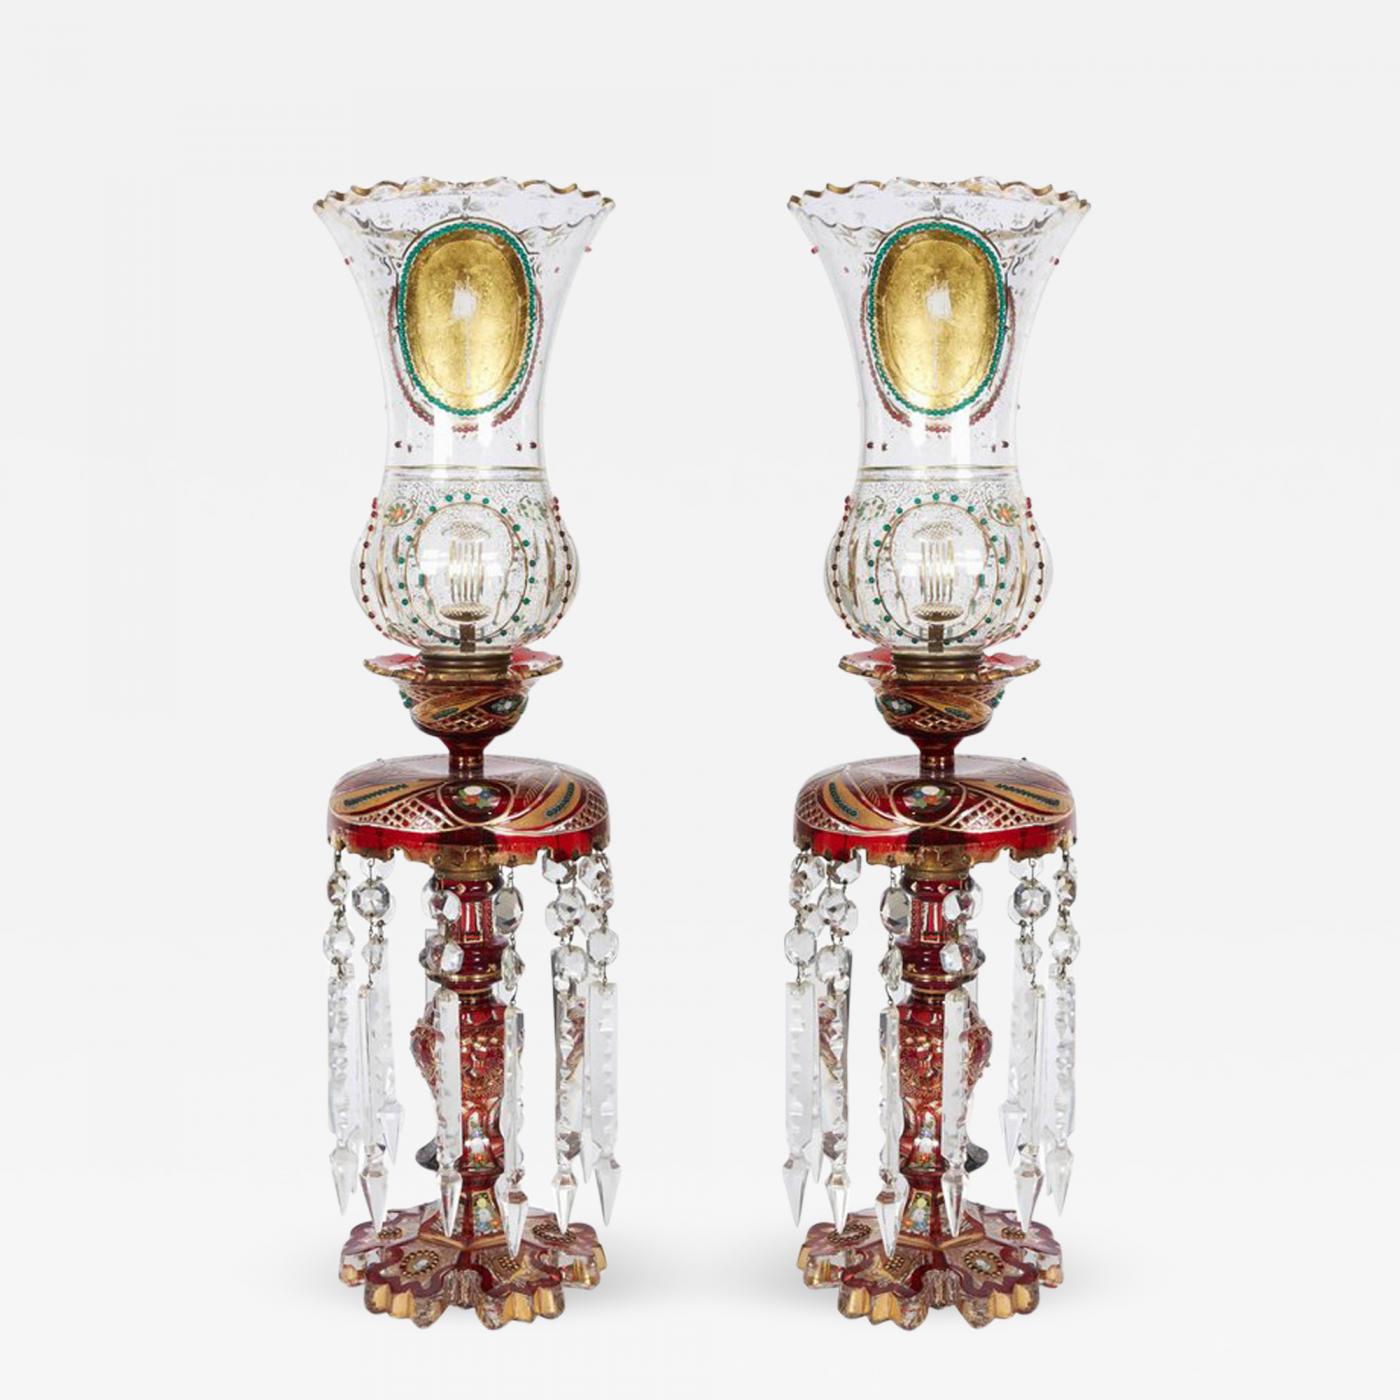 https://cdn.incollect.com/sites/default/files/zoom/Pair-of-Persian-Qajar-Ruby-Red-Jeweled-Bohemian-Glass-Lusters-19th-Century-239073-571128.jpg